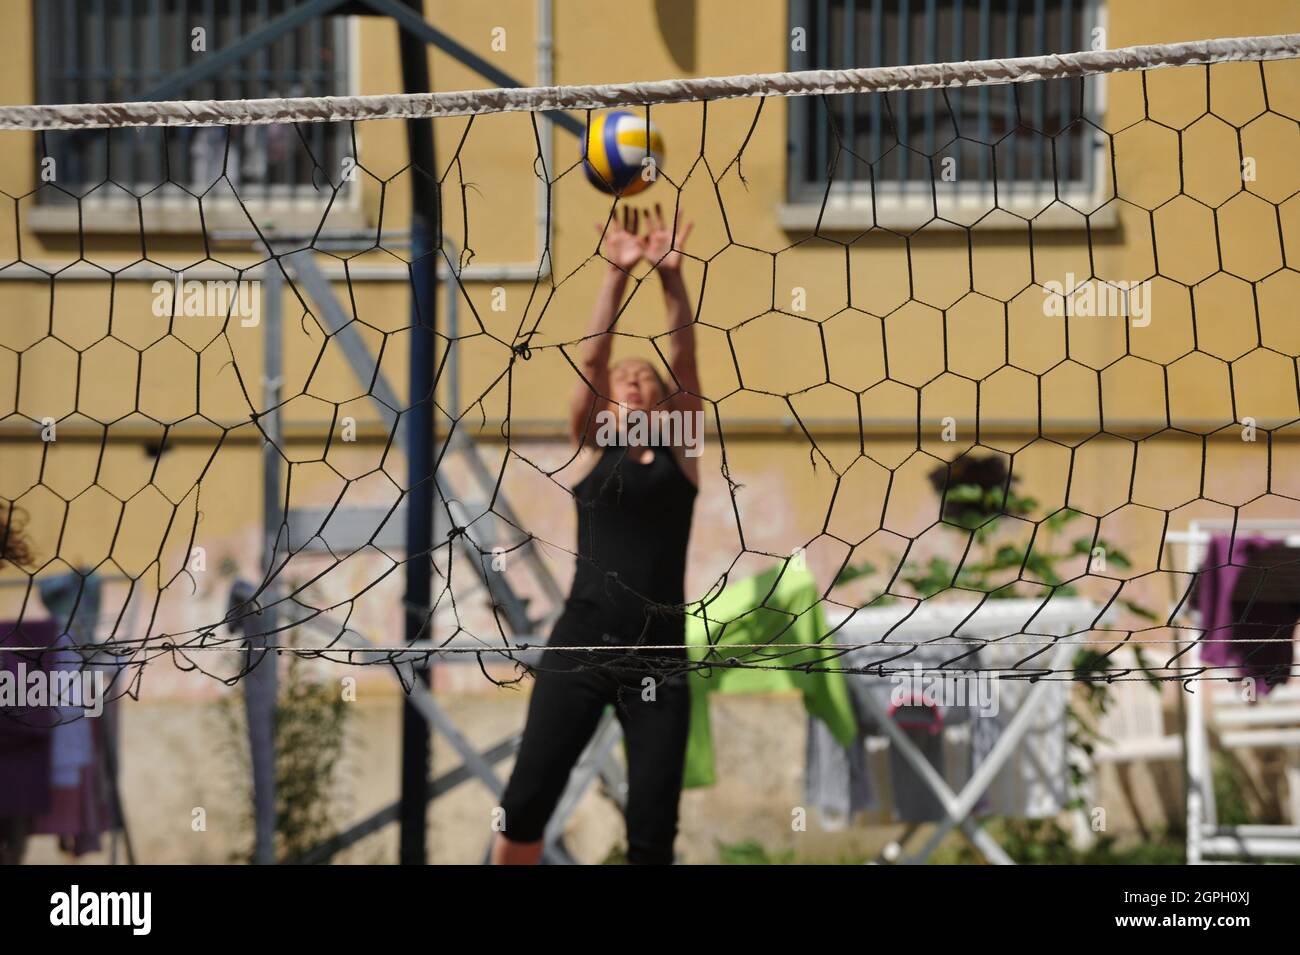 Rome, Italy, 27/05/2010: Rebibbia women's section, the volleyball team. Stock Photo